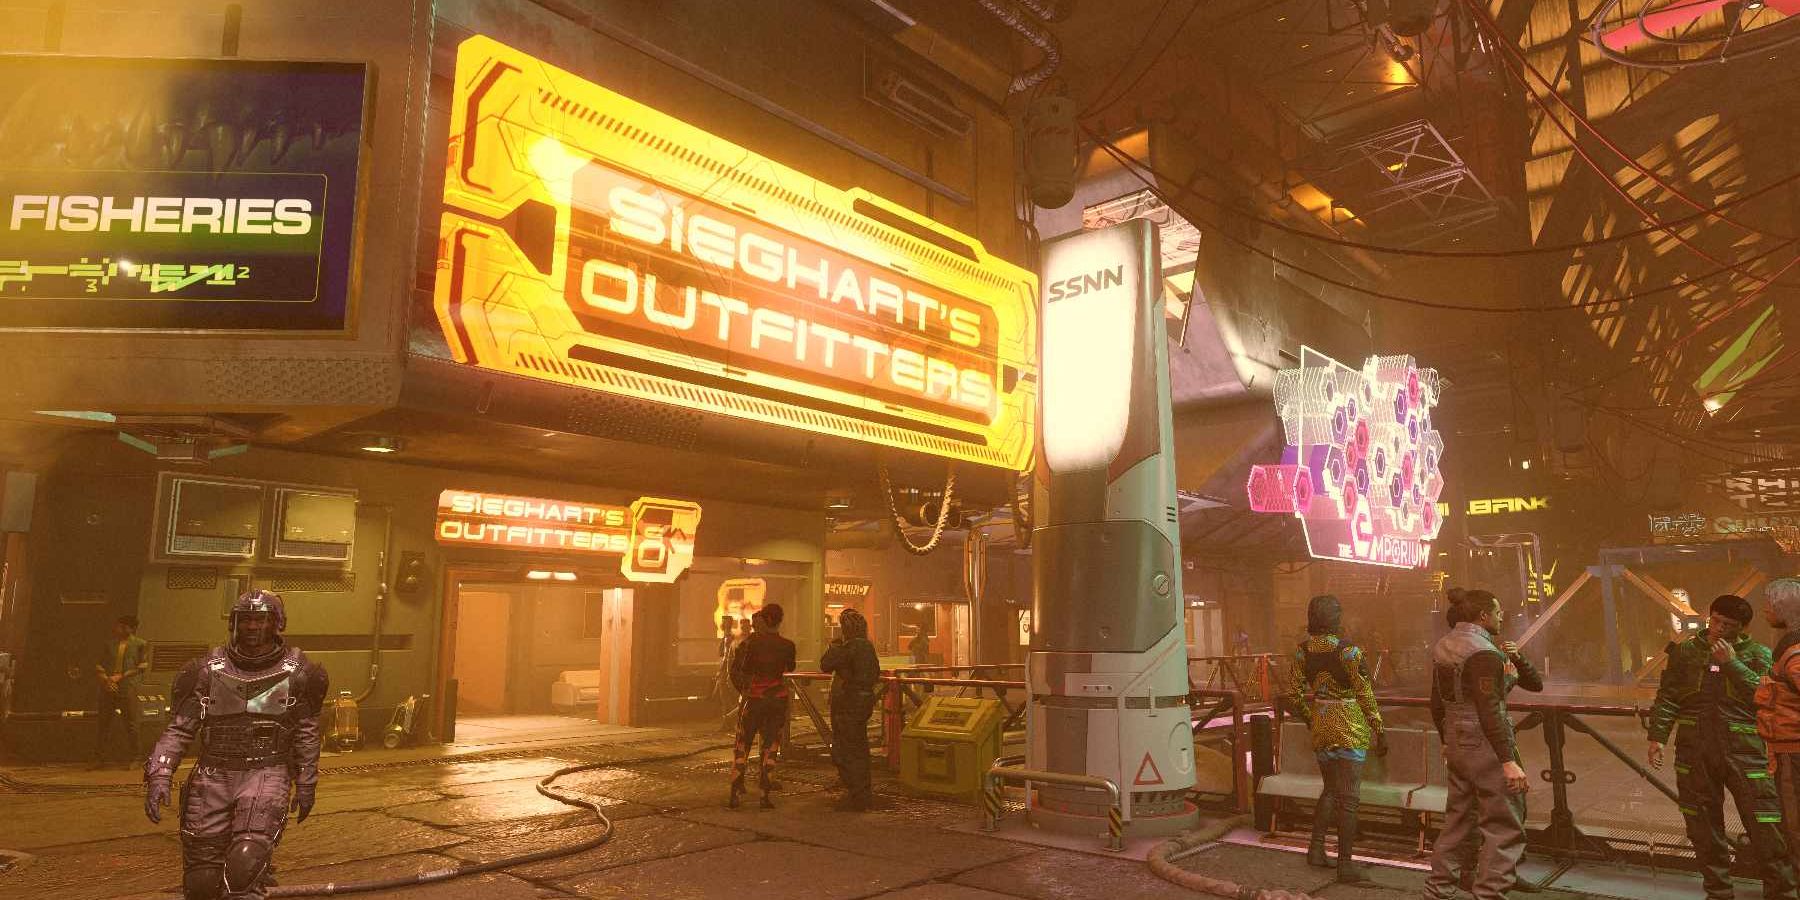 Starfield - Sieghart's Outfitters on Neon